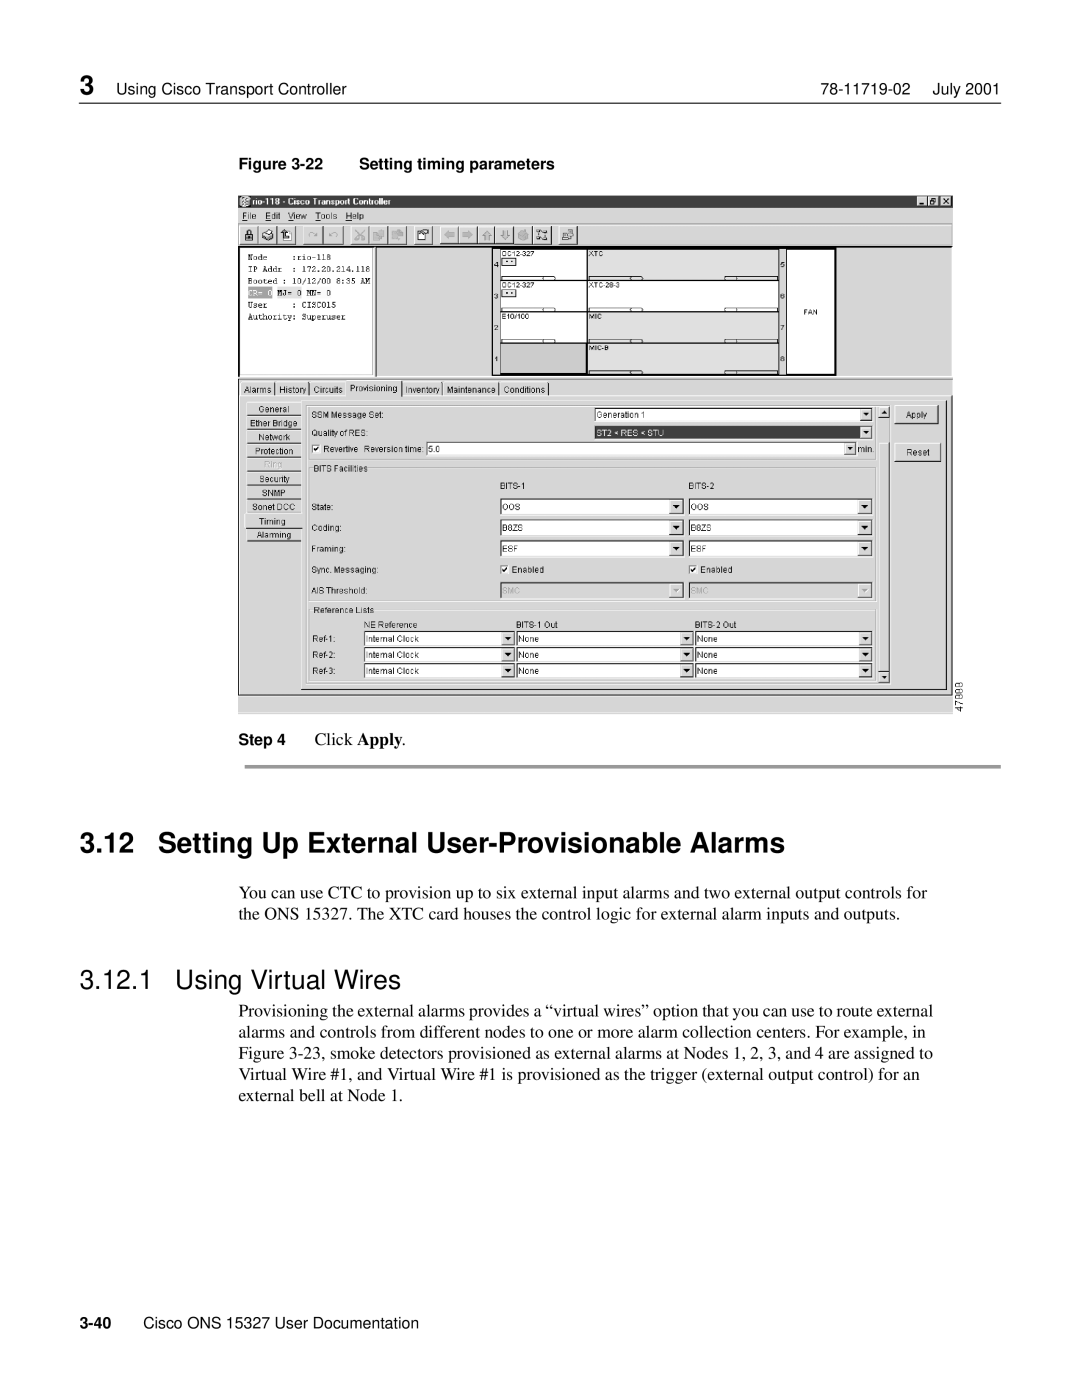 Cisco Systems ONS 15327 manual Setting Up External User-Provisionable Alarms, Using Virtual Wires 